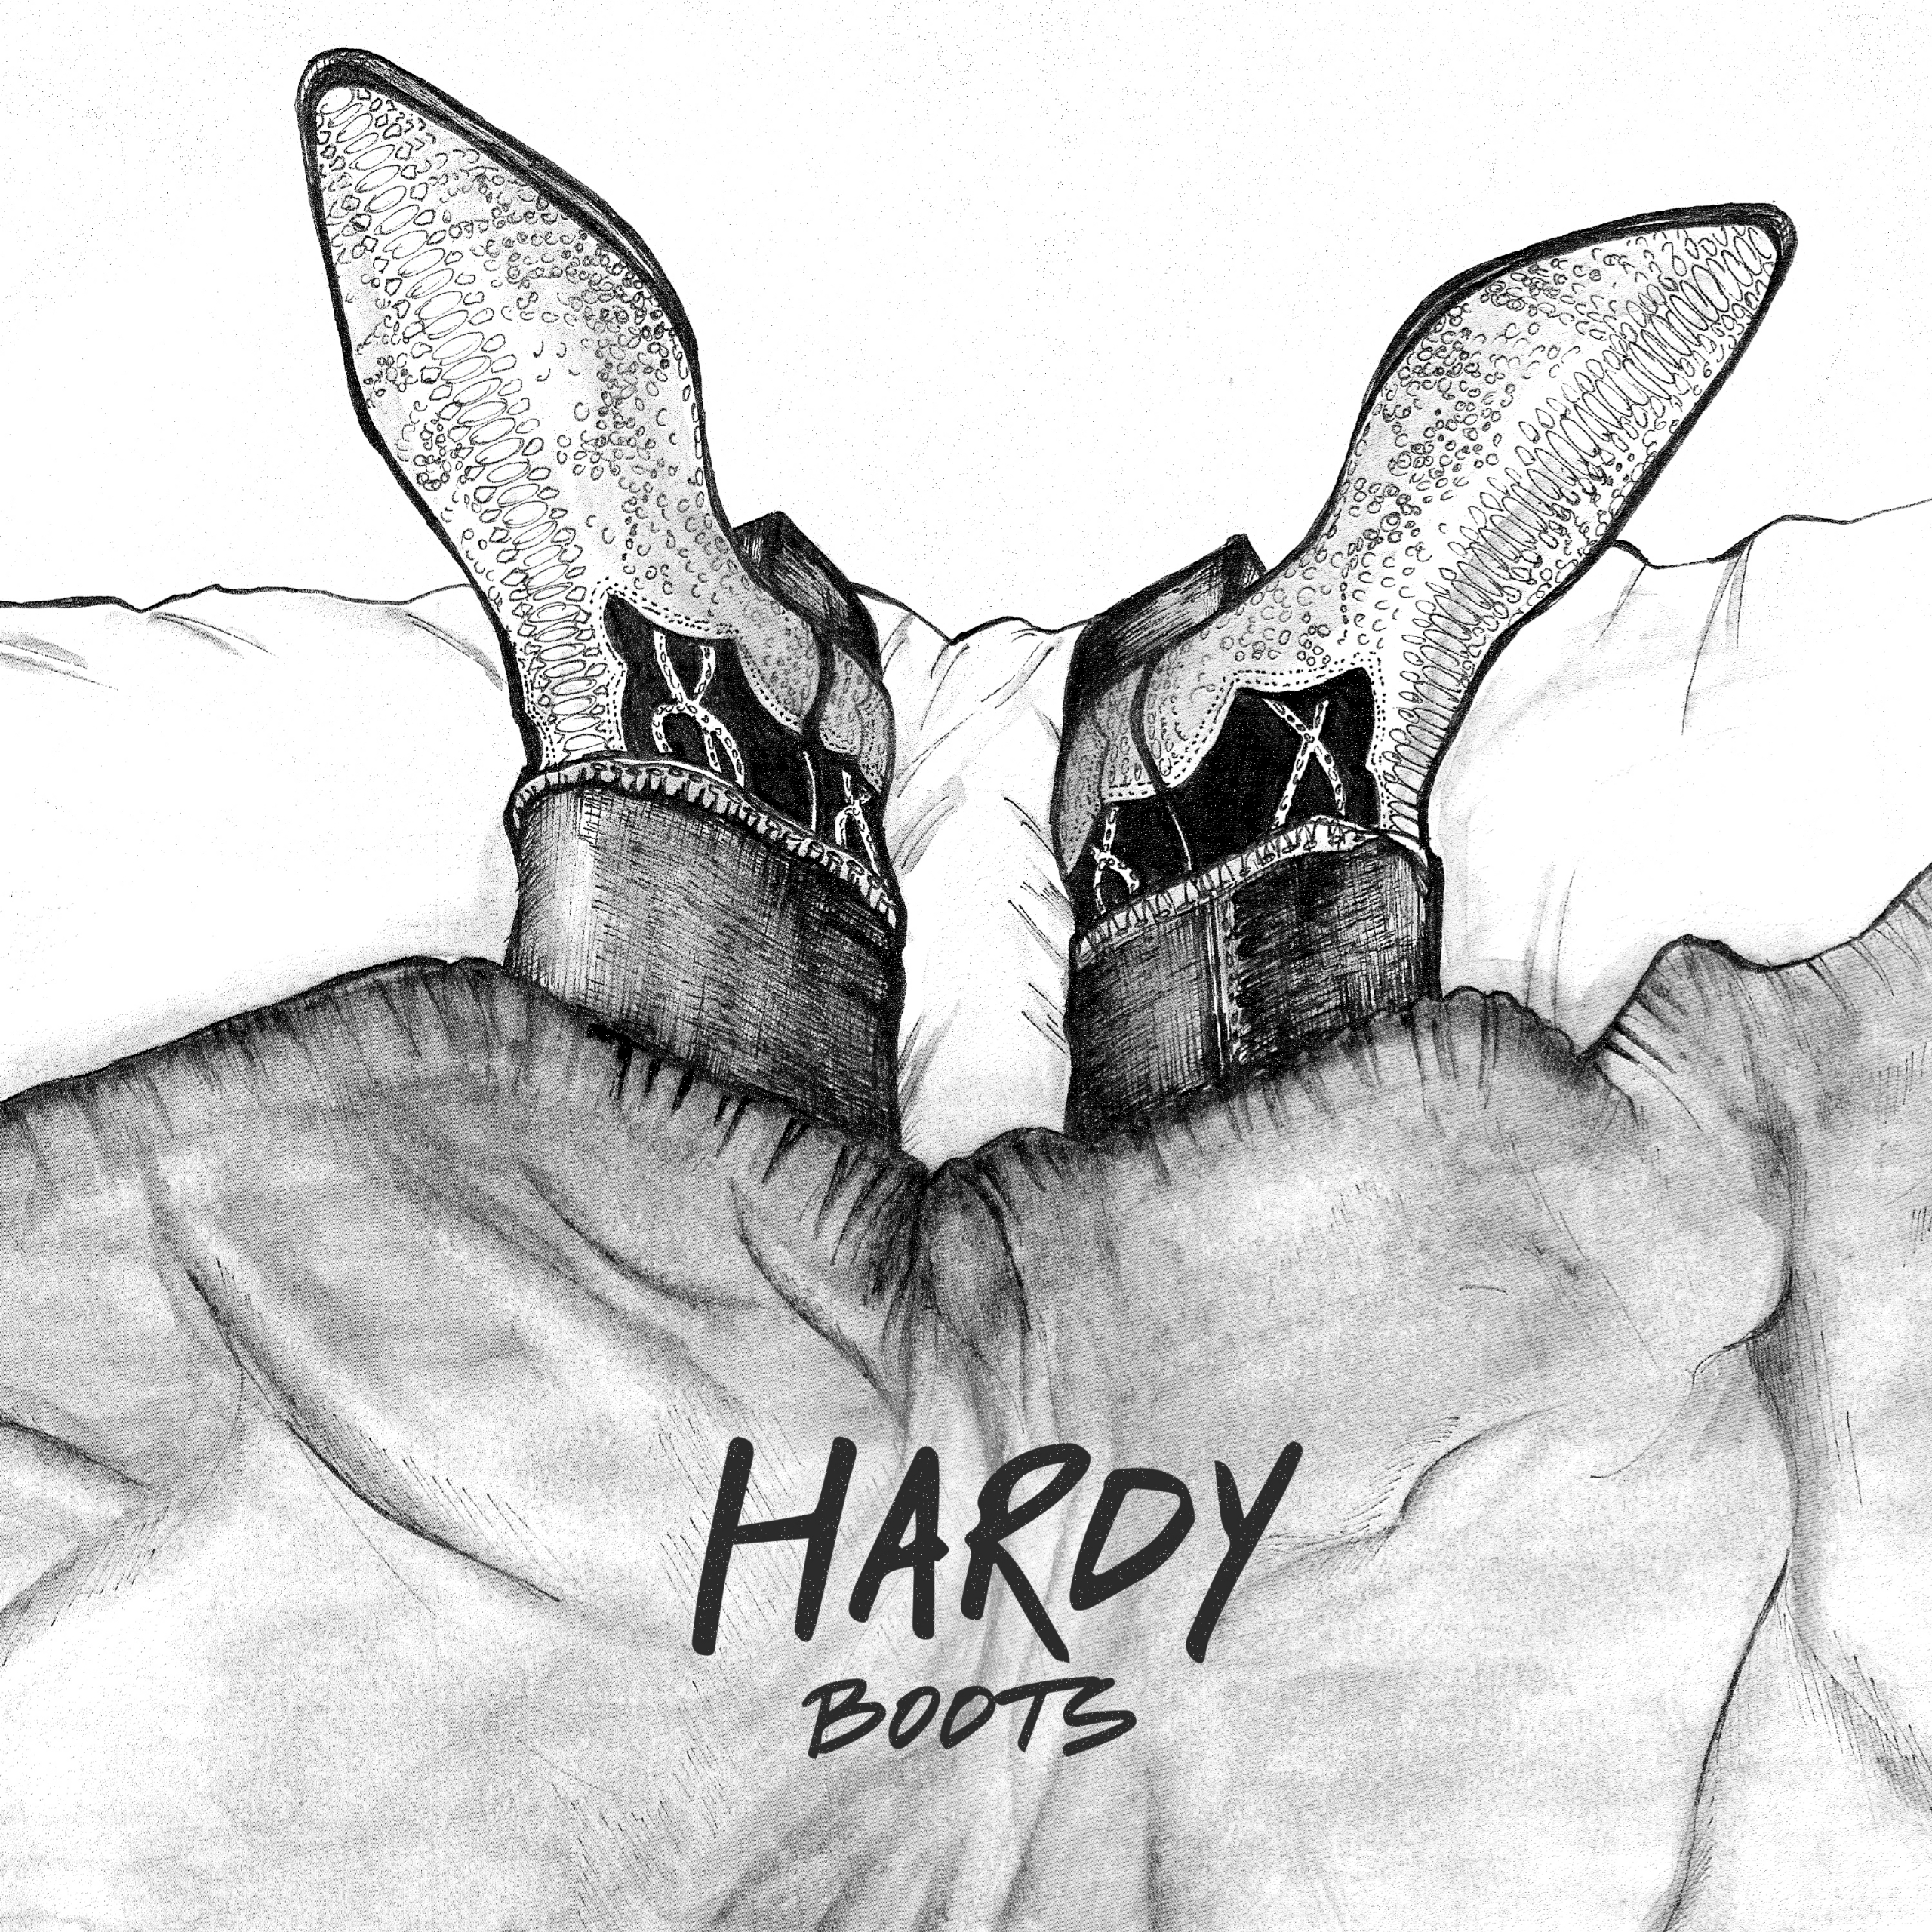 HARDY Boots